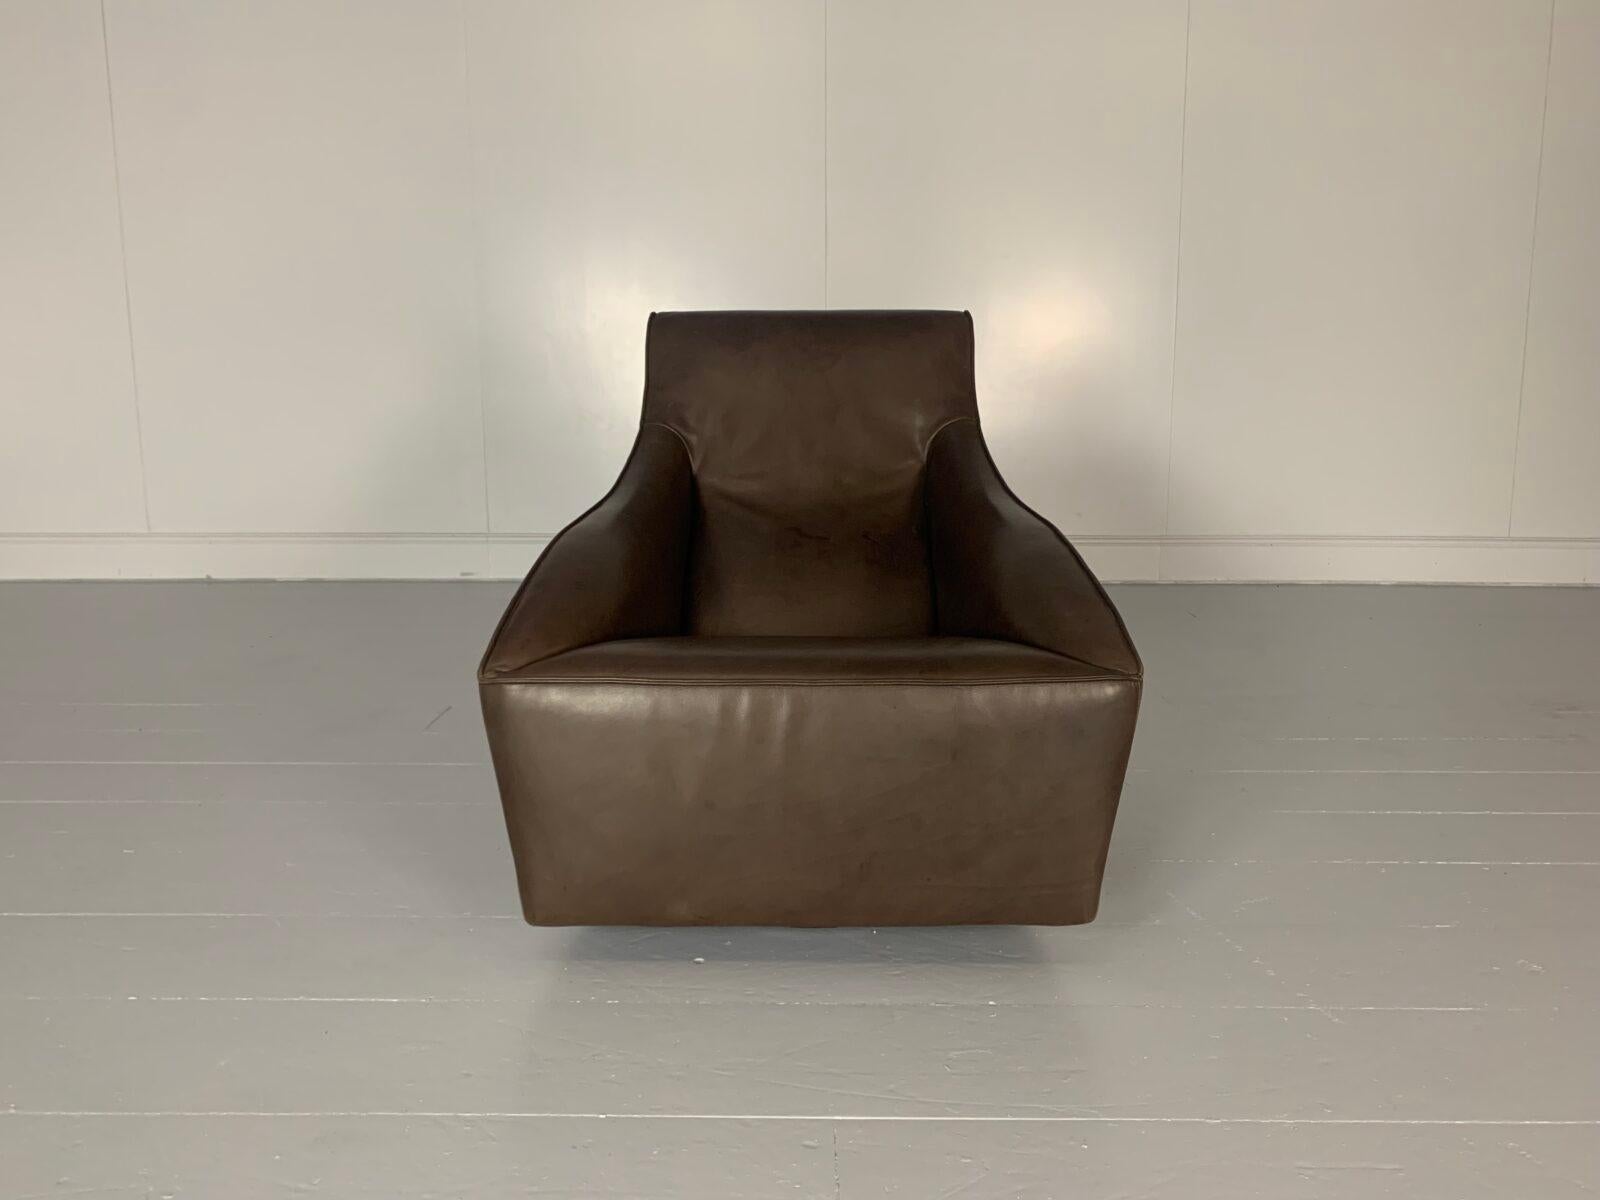 On offer on this occasion is a superb, beautifully-presented example of the iconic “Doda” Rotating/Swivel Armchair in a stunning Pale Walnut Leather, manufactured by the leading Italian Furniture House, Molteni & C.

As you will no doubt be aware by